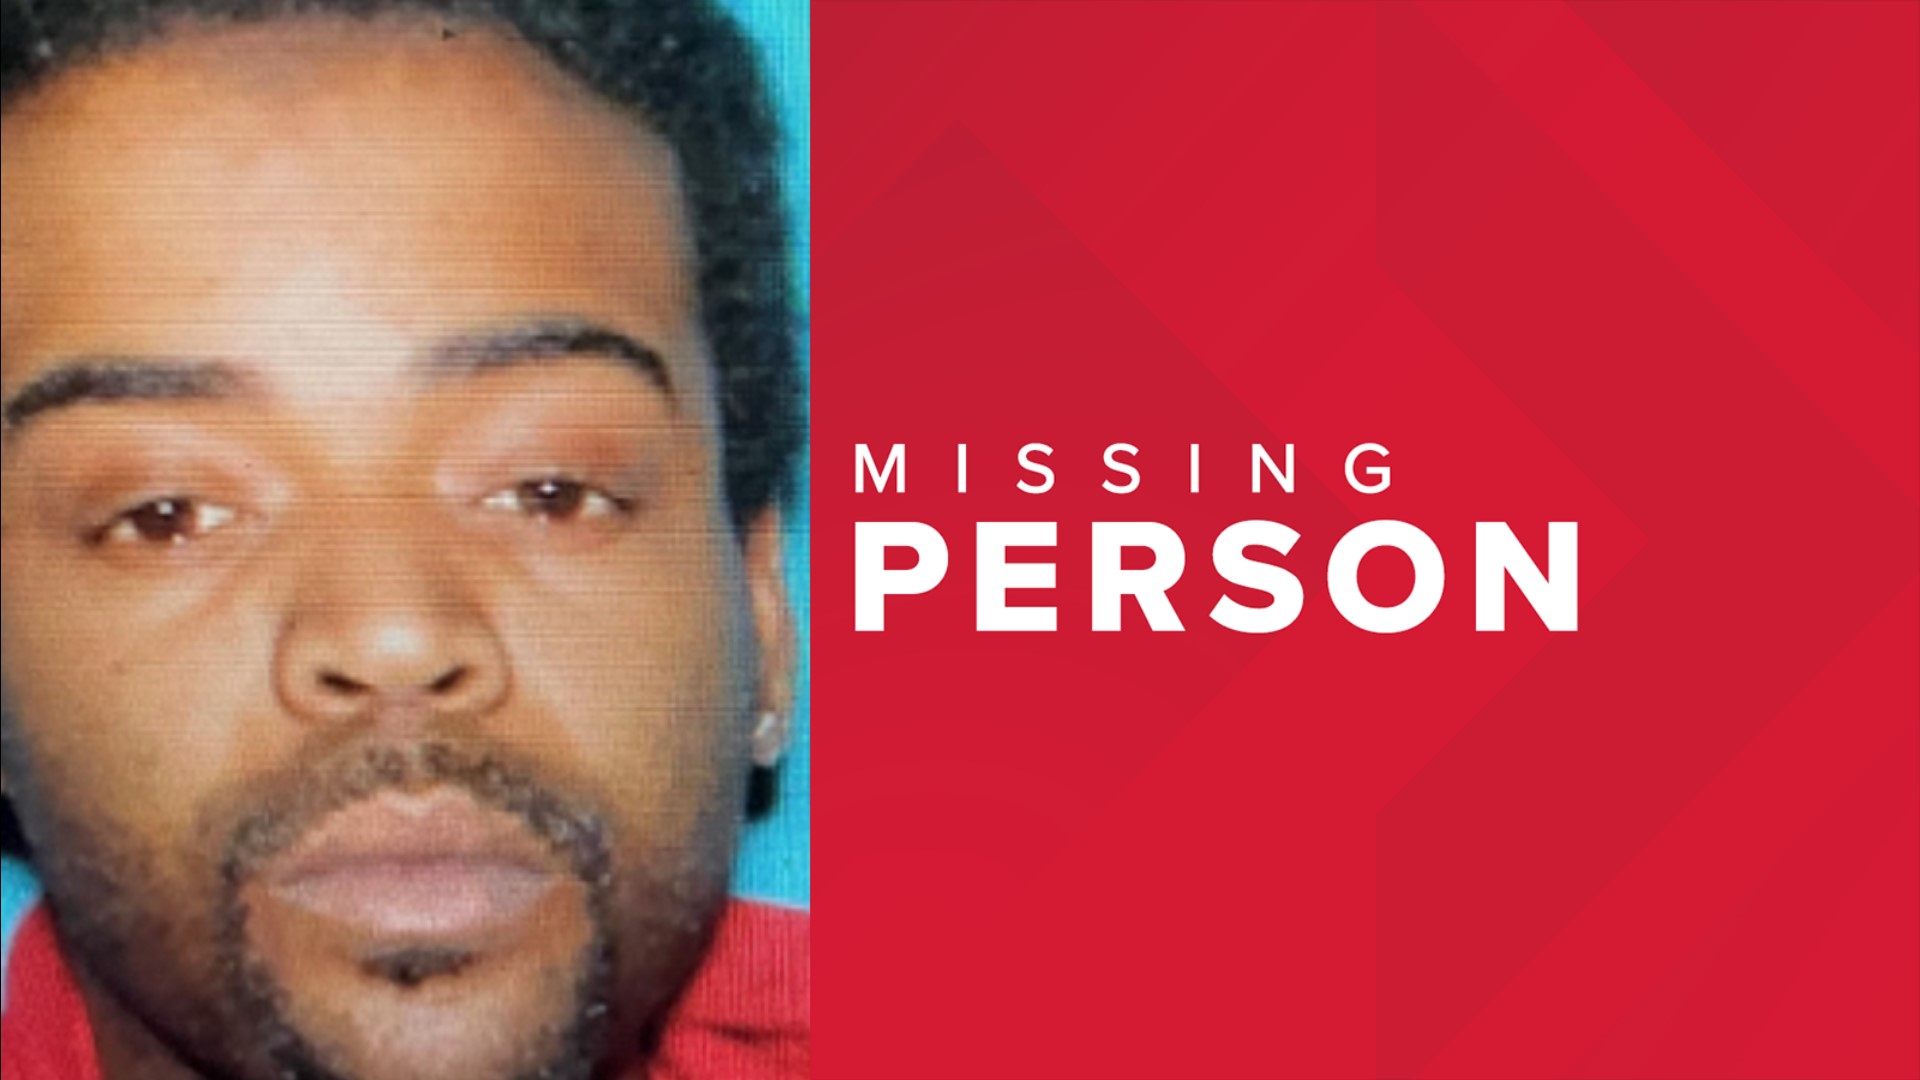 IMPD is asking for help finding a man who investigators believe may be in danger after possibly being abducted on the northeast of Indianapolis.